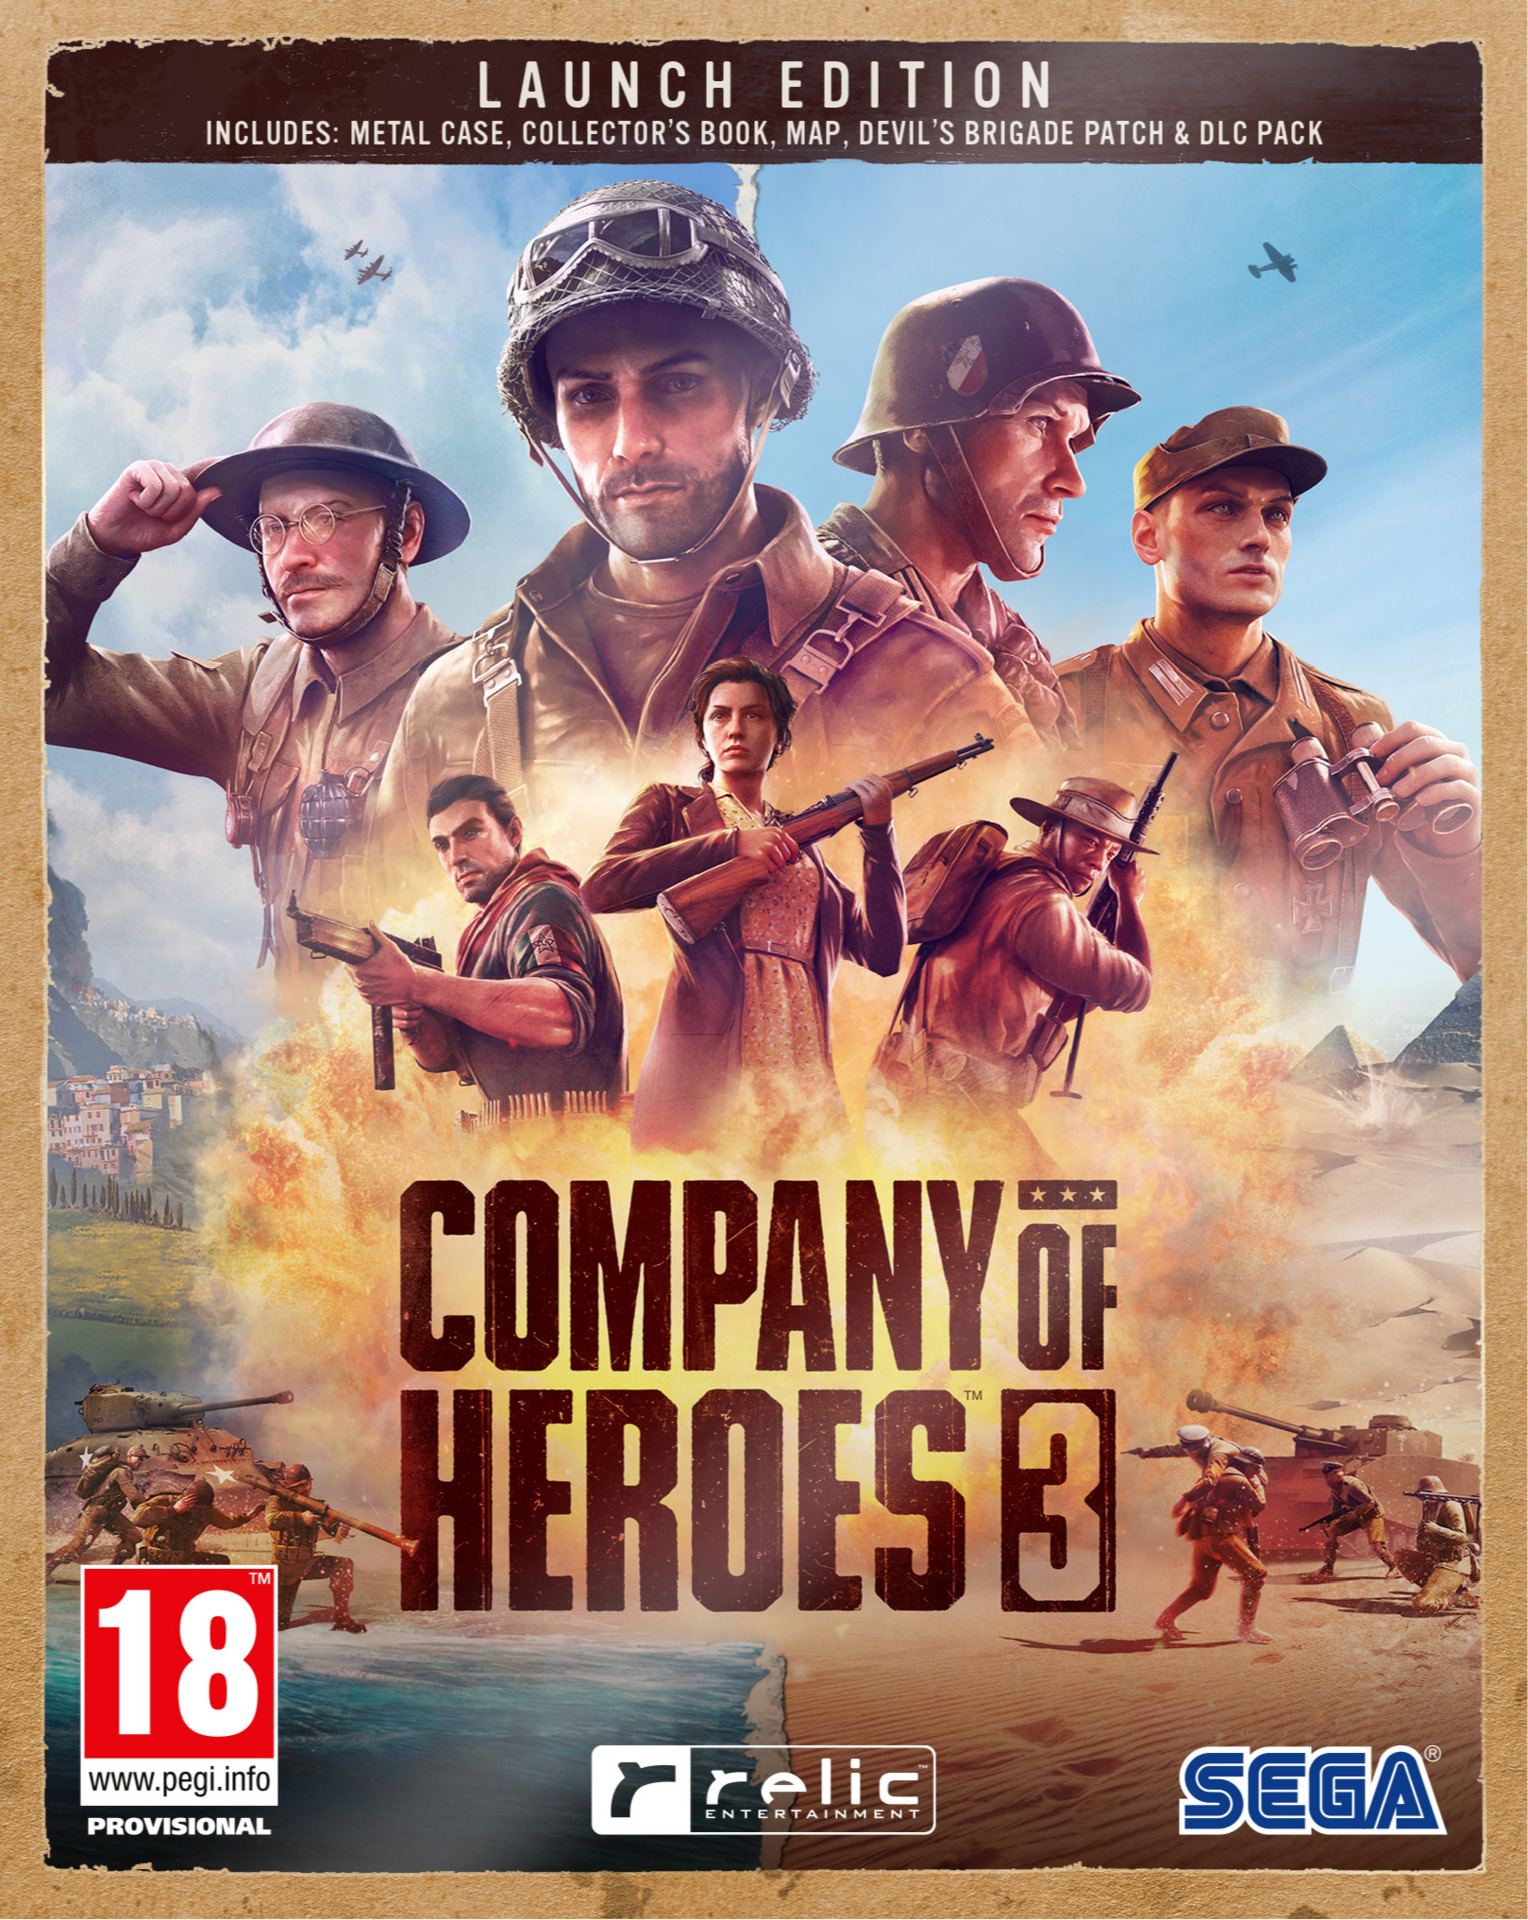 Company of Heroes 3 - Launch Edition (Metal Case)